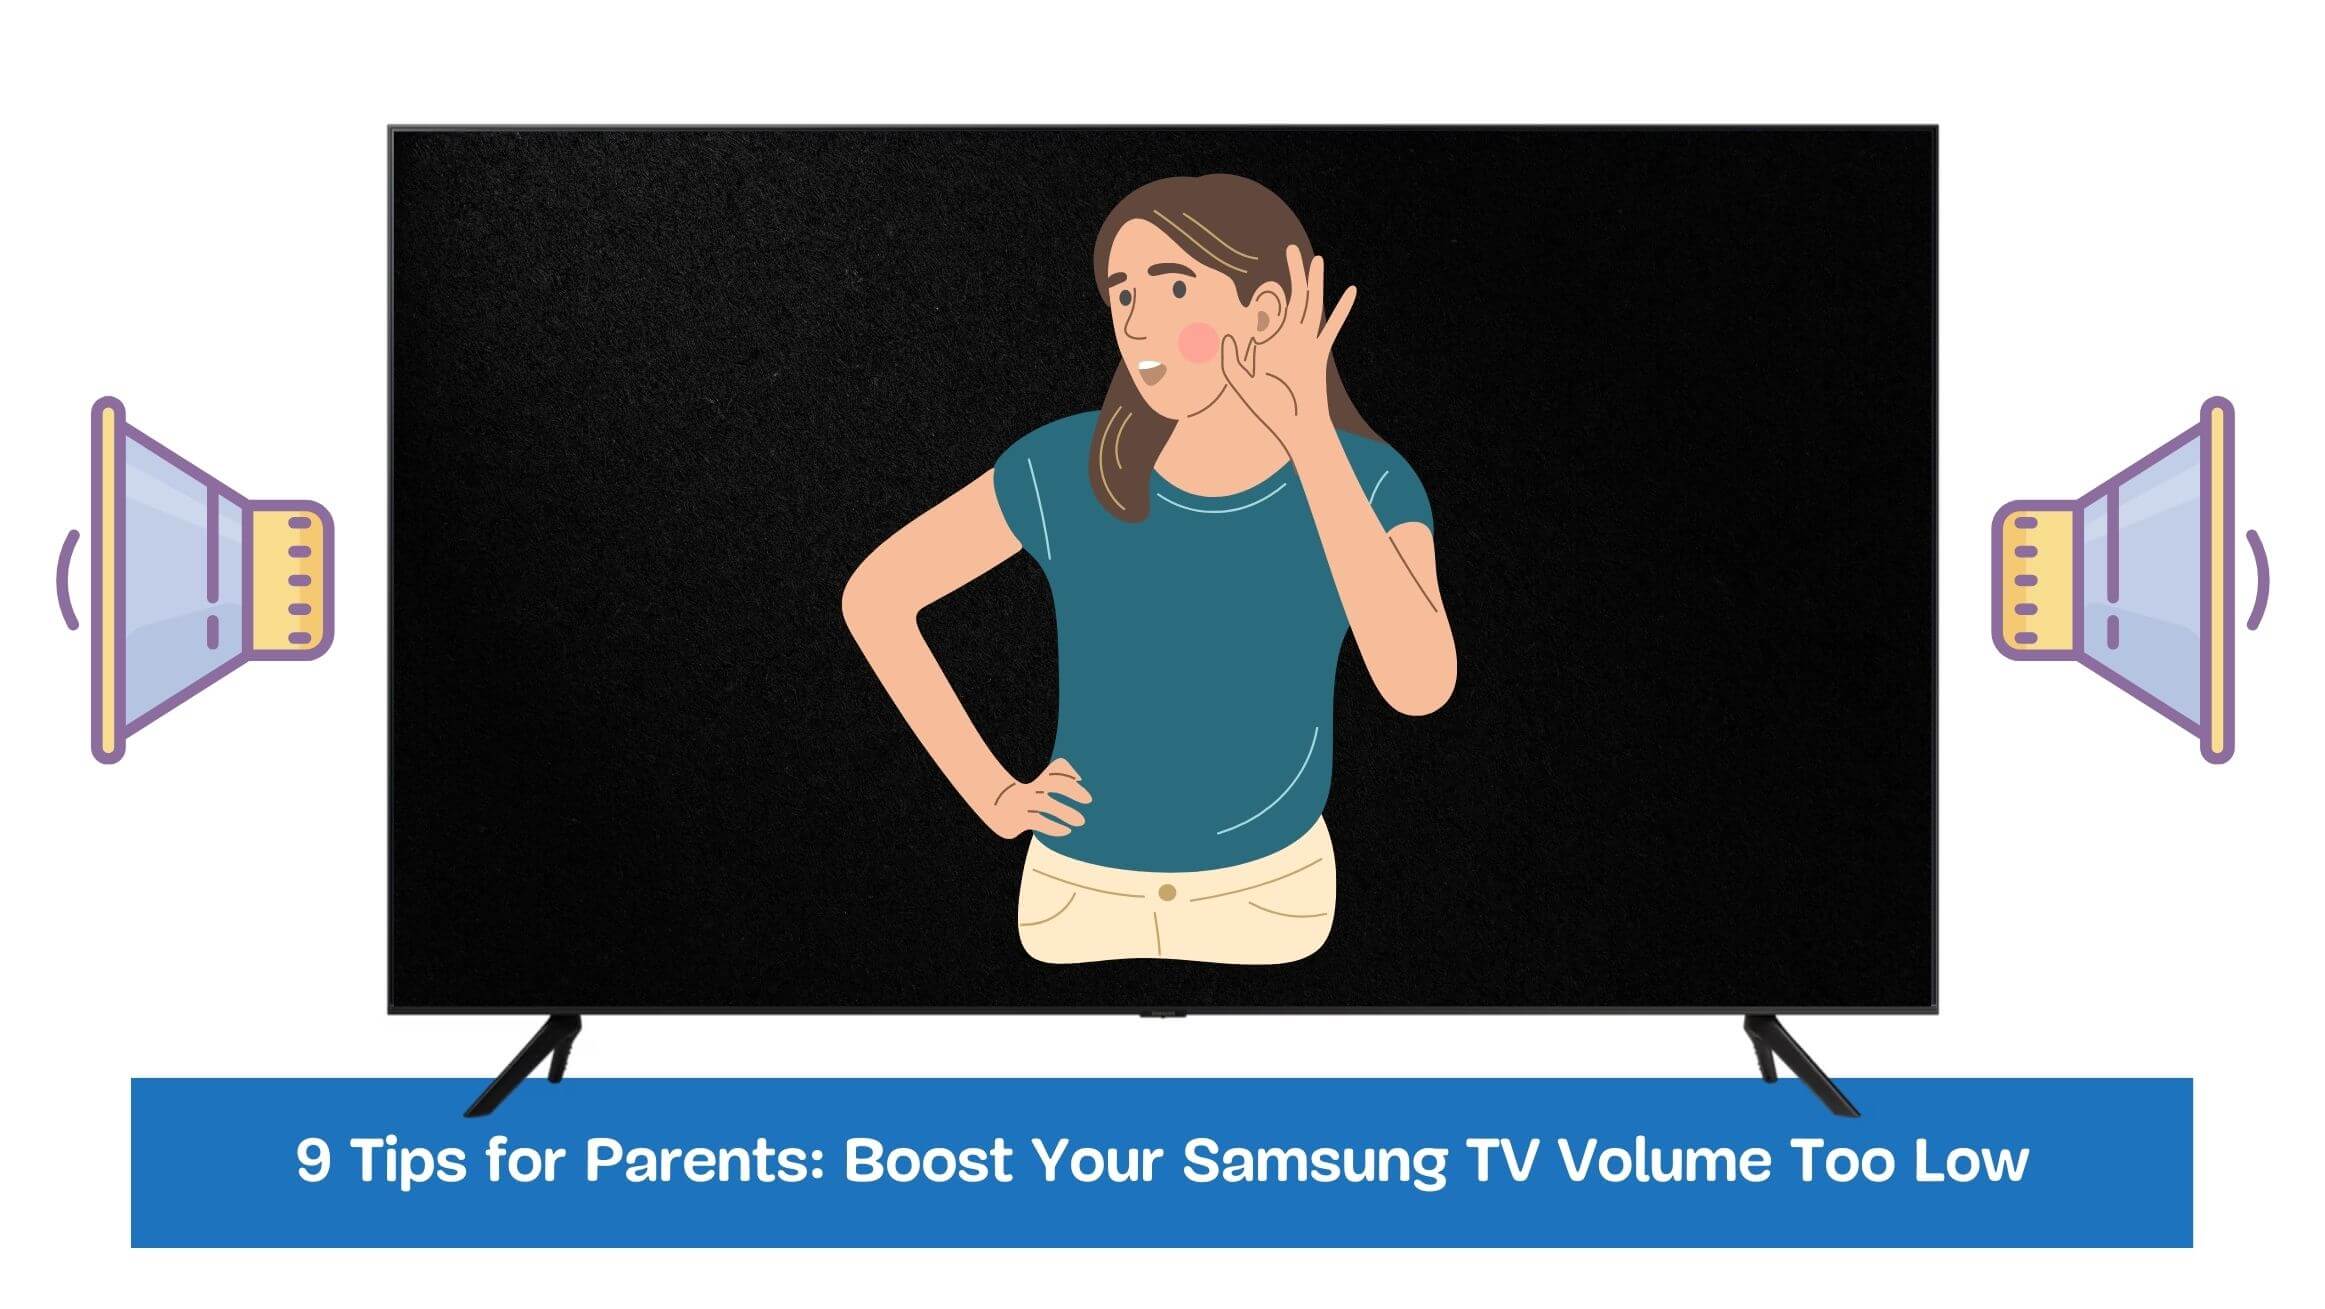 9 Tips for Parents: Boost Your Samsung TV Volume Too Low